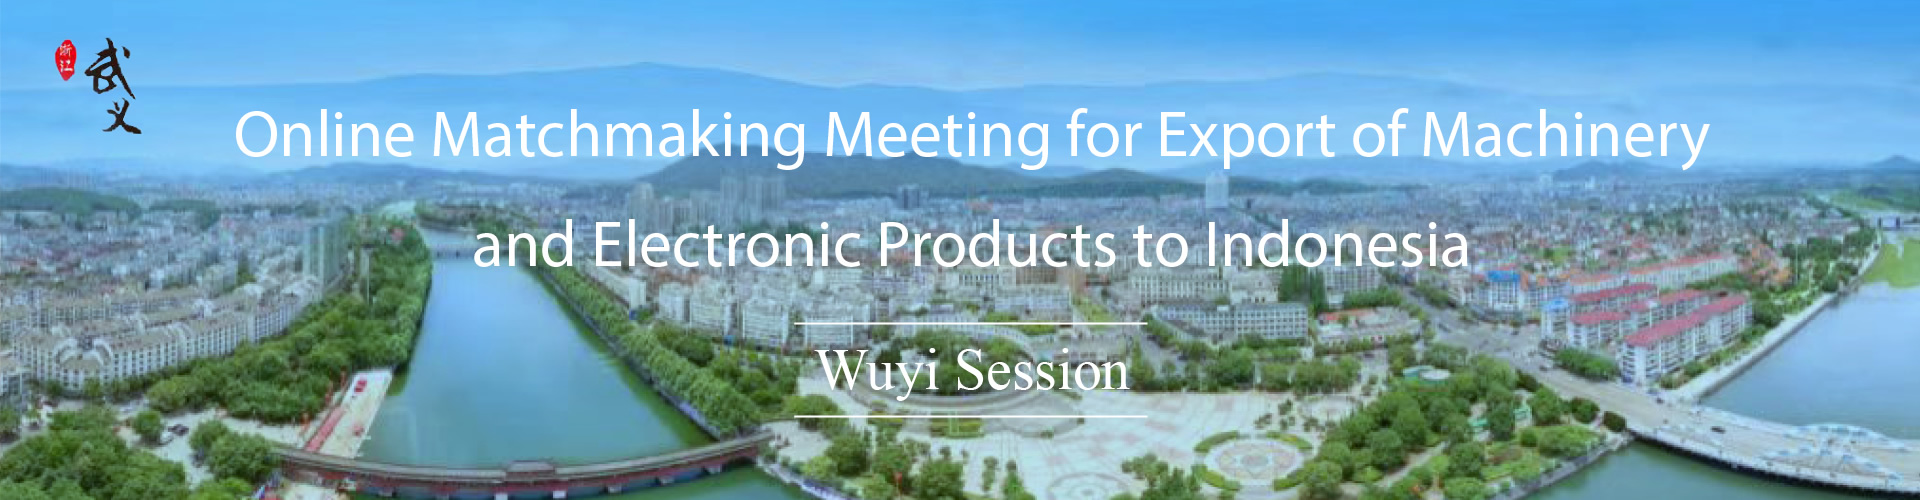 Online Matchmaking Meeting for Export of Machinery and Electronic Products to Indonesia (Wuyi Session)